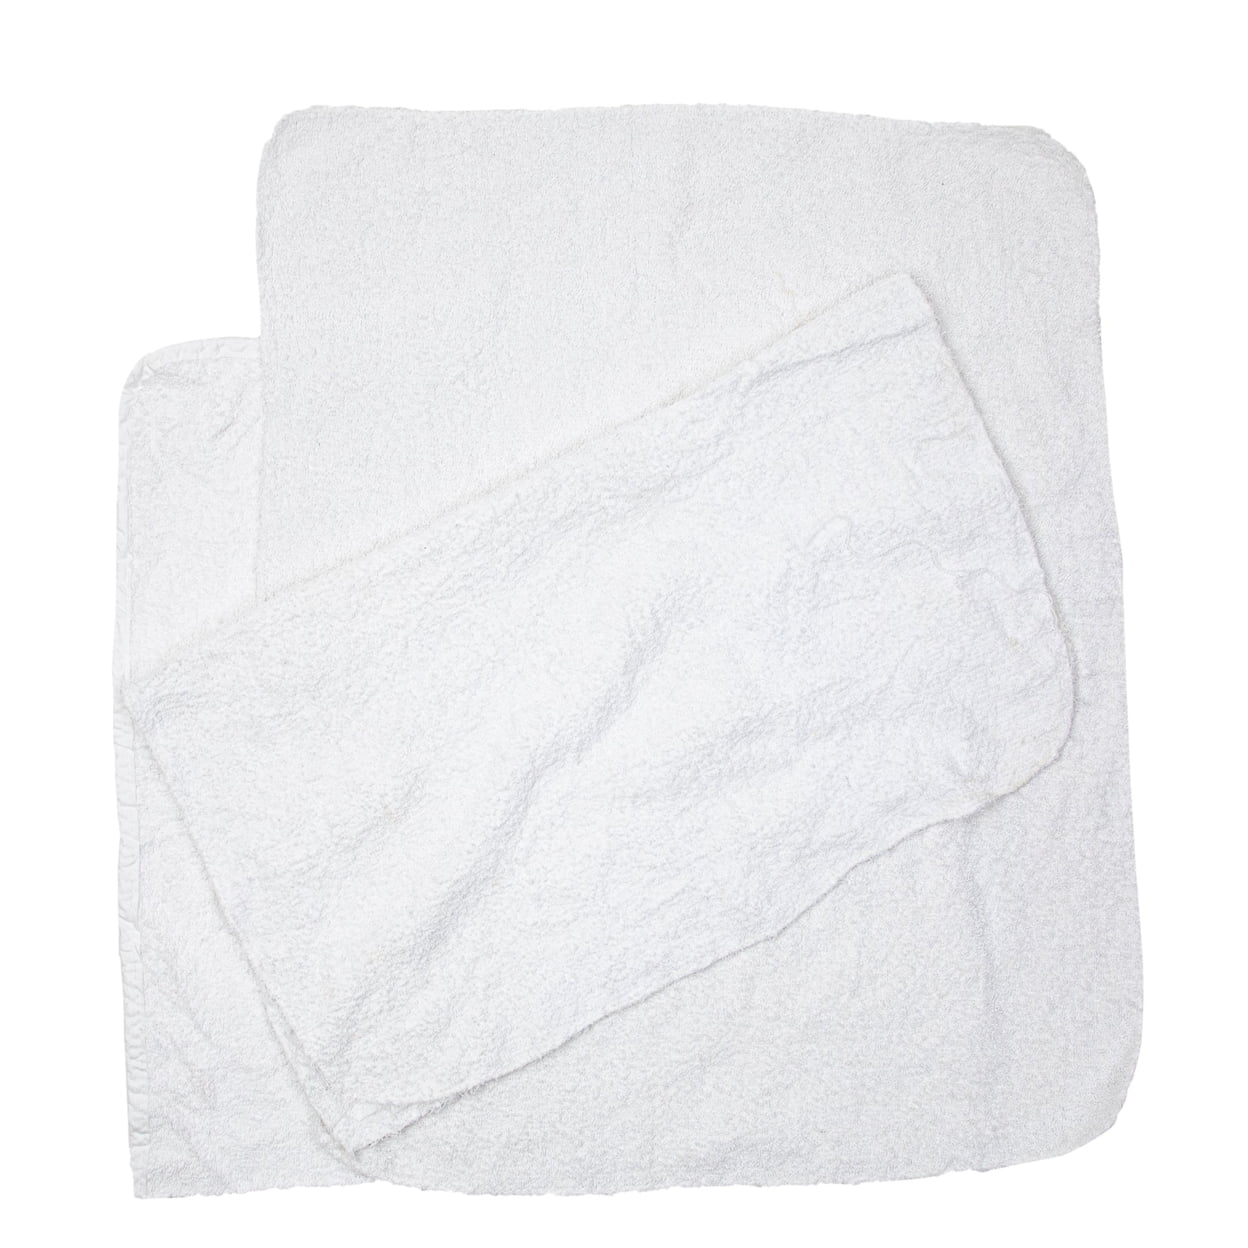 Arkwright Reclaimed Terry Cleaning Rags (5 lb Bag), T-Shirt Material, Sizes  14x14 to 20x20, White Multipurpose Cloth for Home or Business 